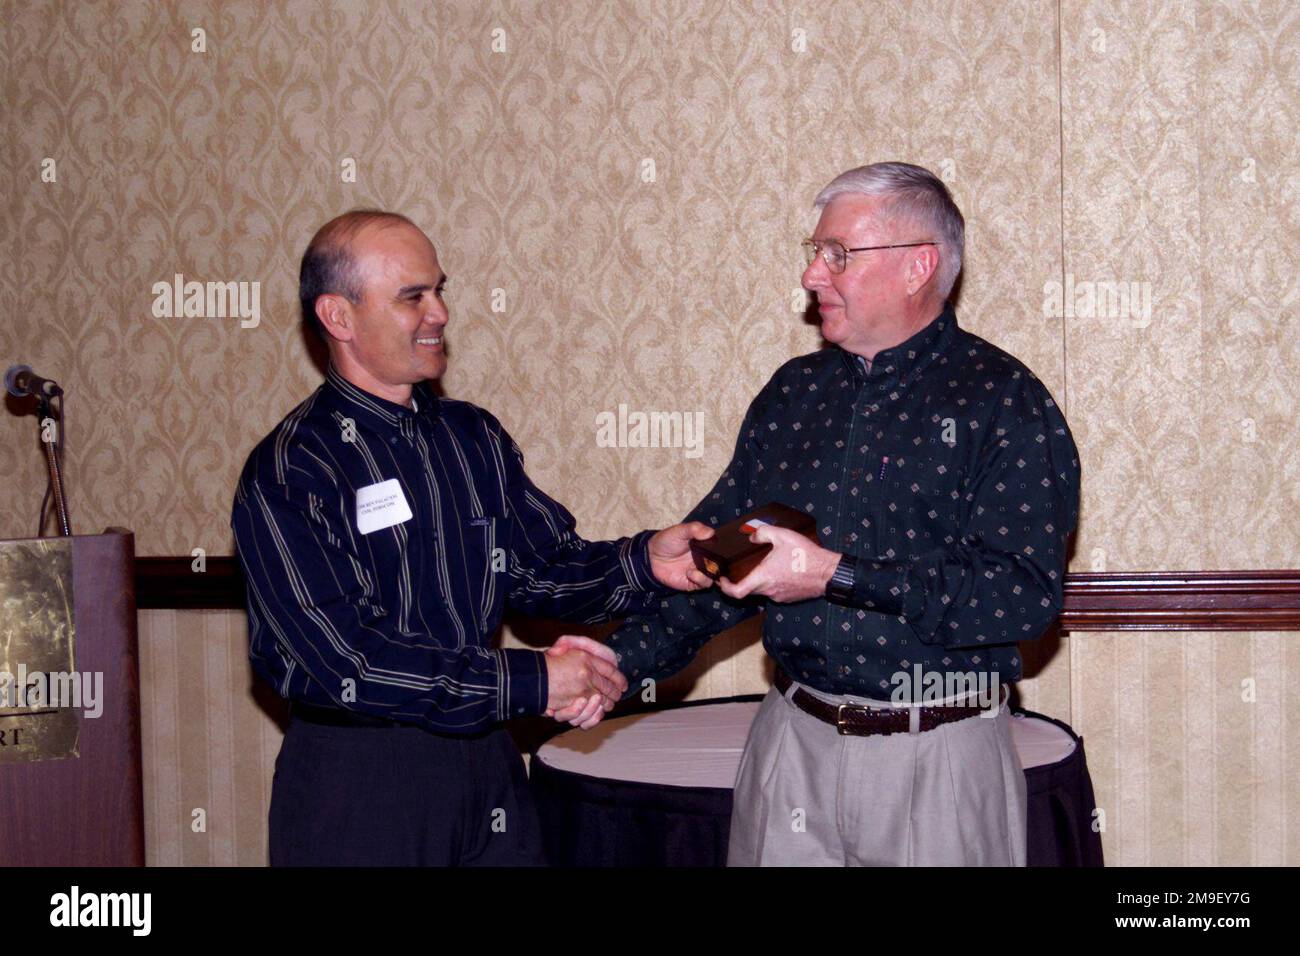 US Army Command Sergeant Major Benjamin C. Palacios (Left) presents a momento to the Sergeant Major of the Army, Robert E. Hall, on behalf of all the FORSCOM (United States Army Forces Comand) Command Sergeants Major during a dinner at the Command Sergeants Major Conference, College Park, Georgia. Base: College Park State: Georgia (GA) Country: United States Of America (USA) Stock Photo